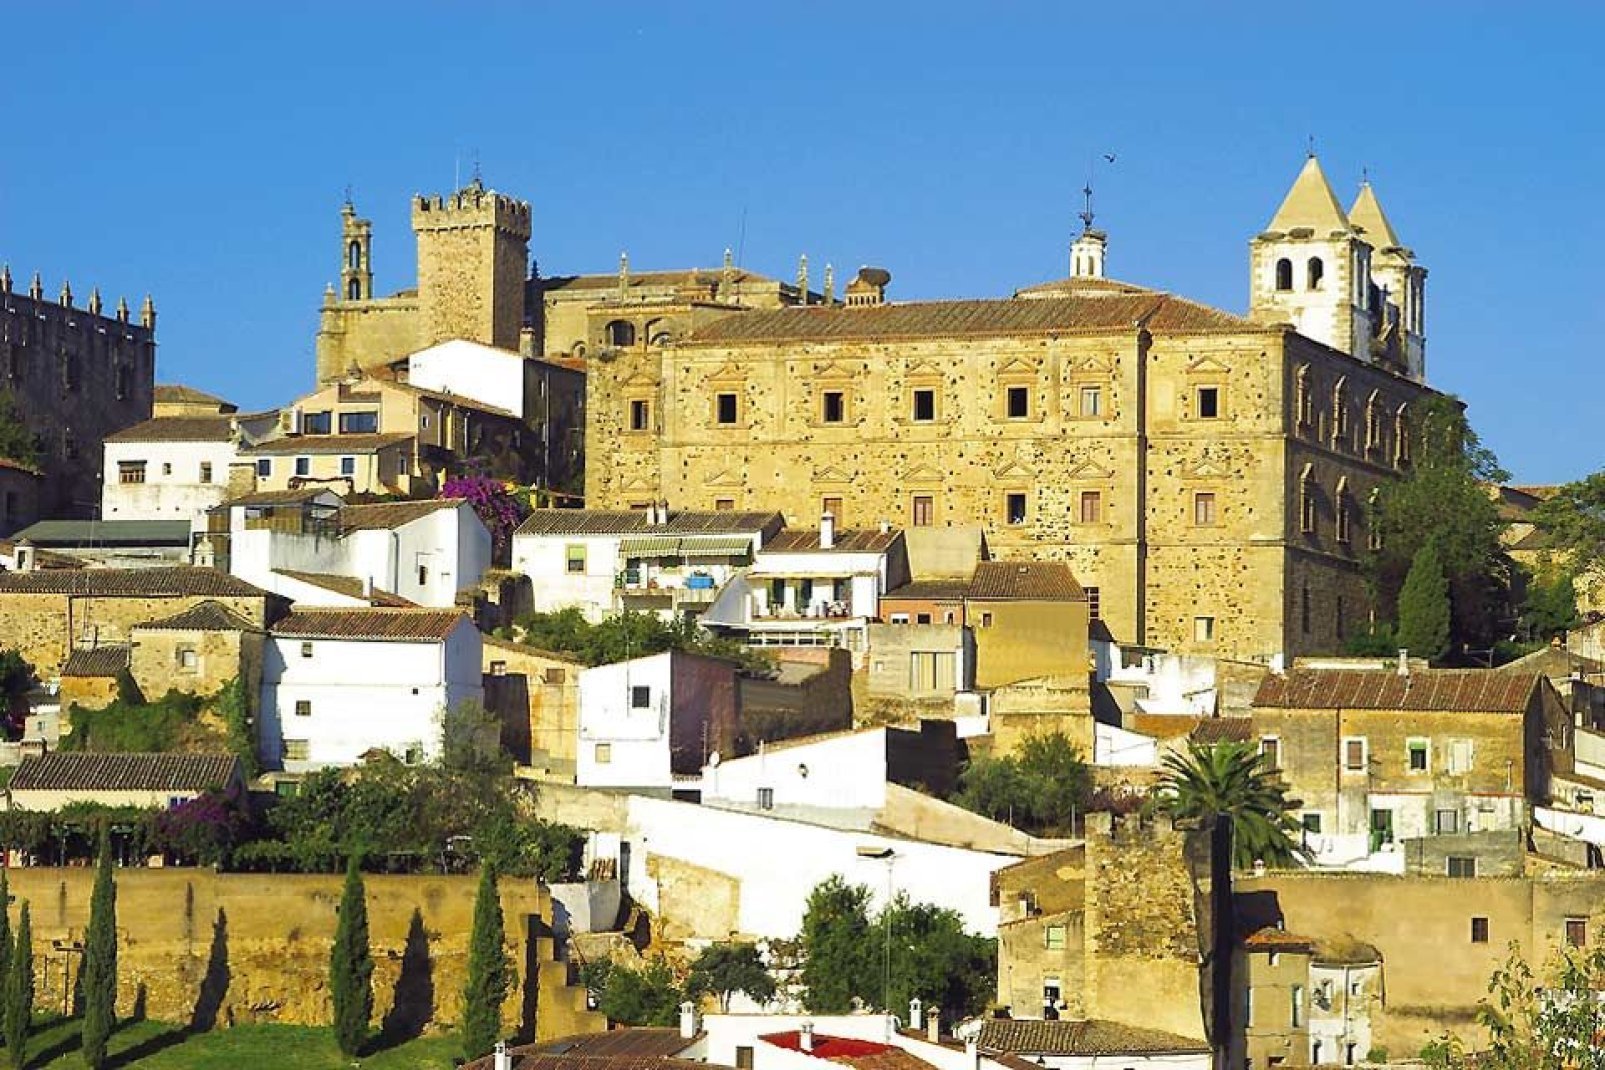 The city centre of Caceres is surrounded by walls of Arabic origin.